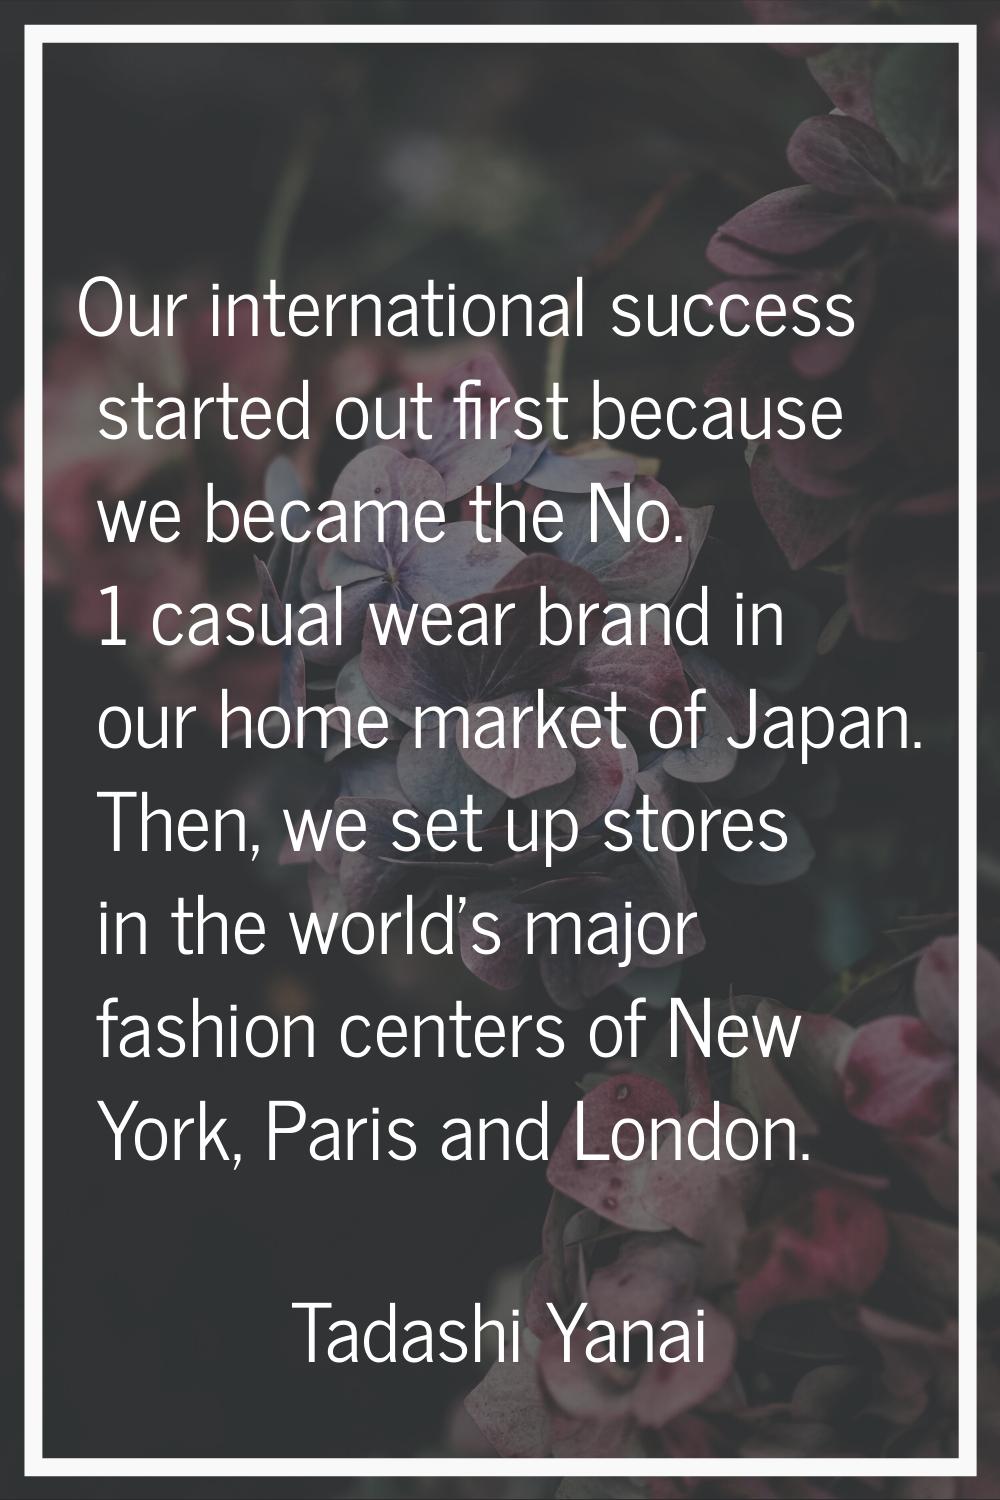 Our international success started out first because we became the No. 1 casual wear brand in our ho